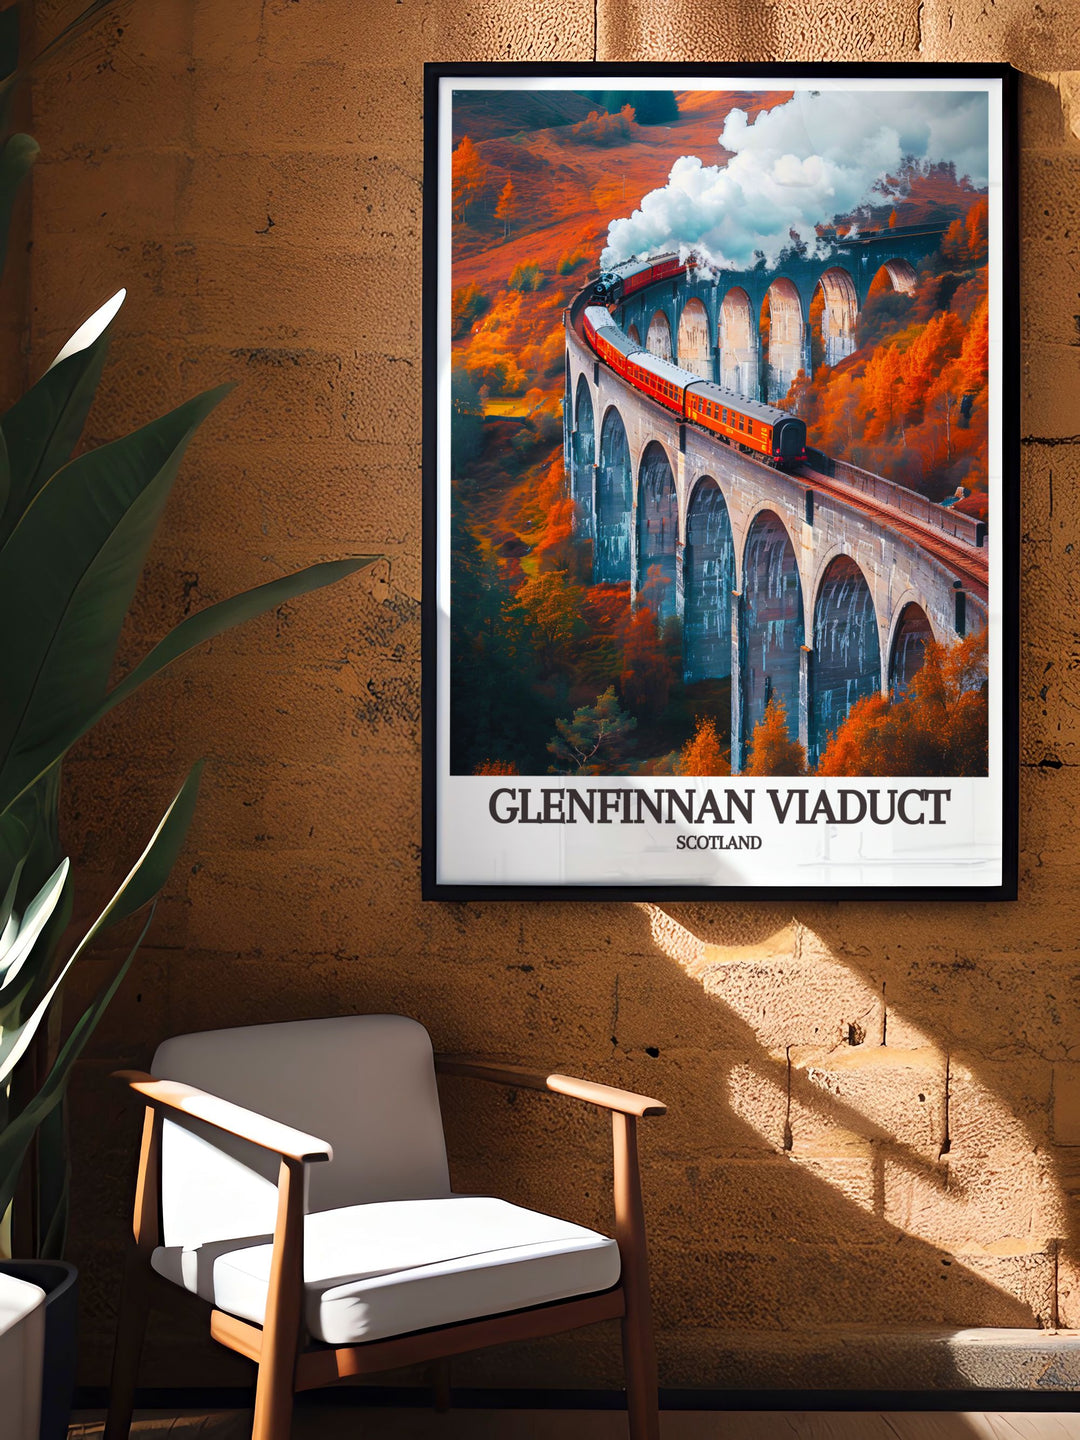 Vintage travel poster of the Glenfinnan Viaduct, featuring the iconic railway bridge and the lush landscapes of the Scottish Highlands, perfect for adding a nostalgic touch to your decor.